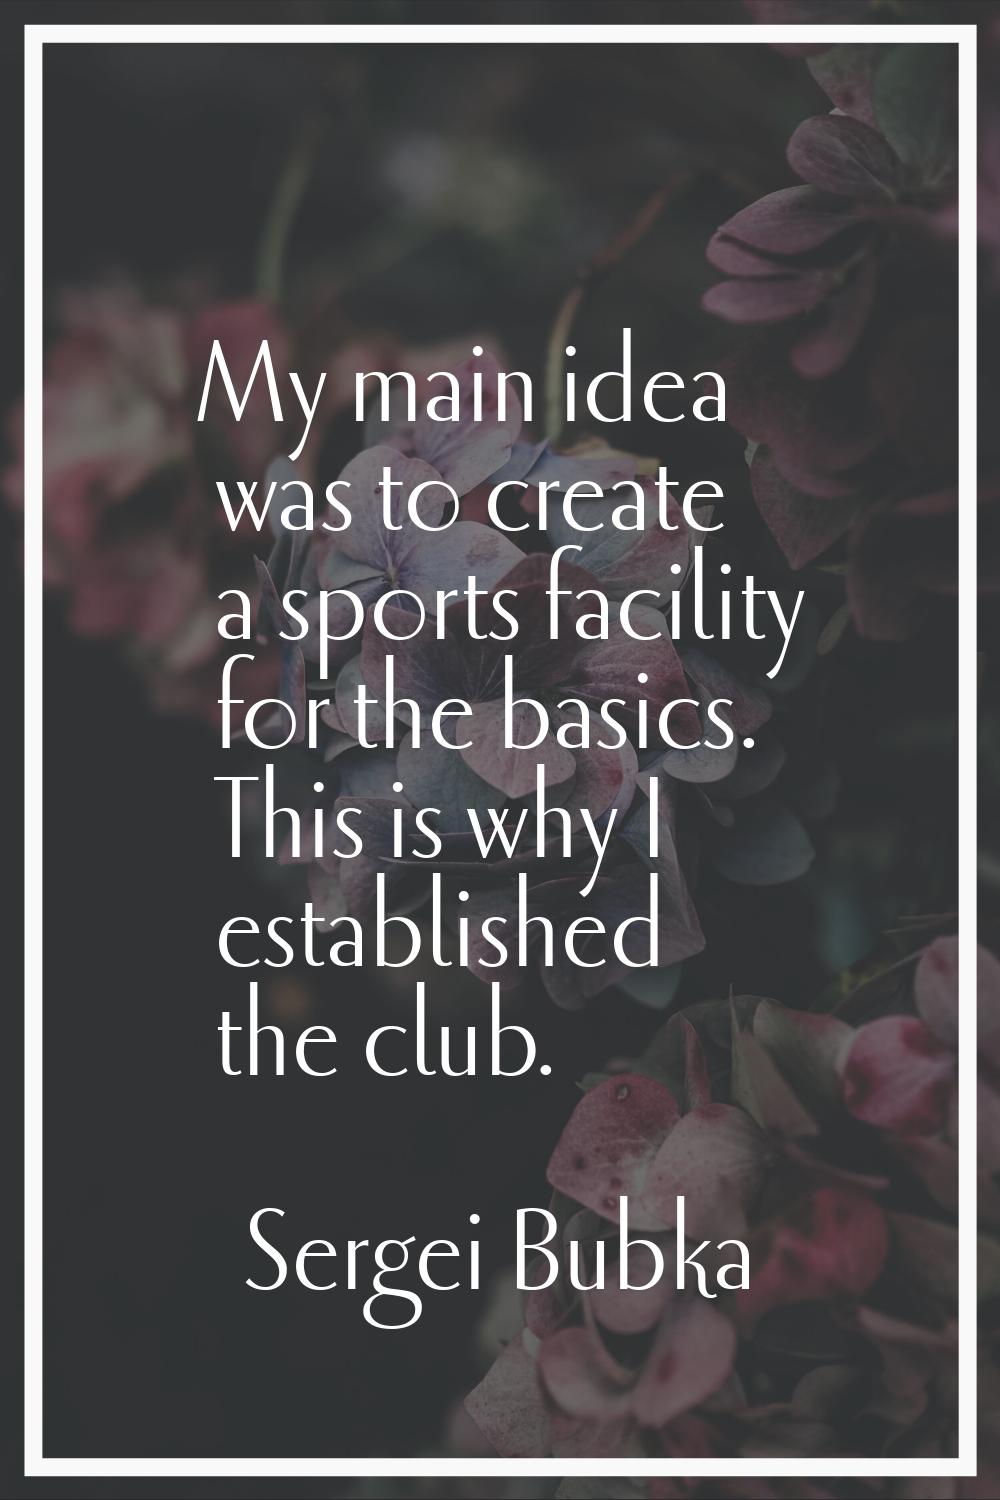 My main idea was to create a sports facility for the basics. This is why I established the club.